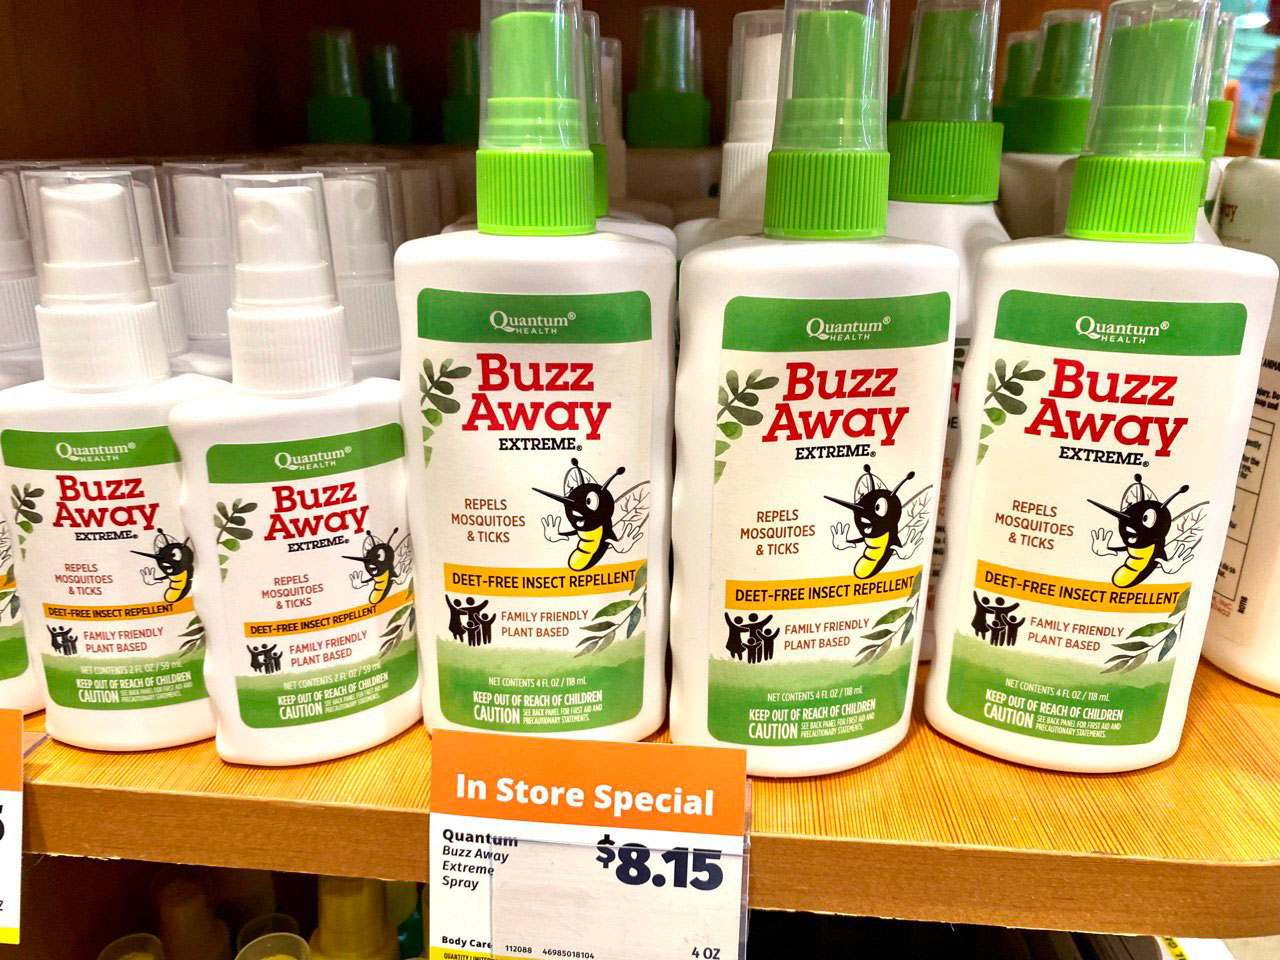 Mosquito Control: Are Organic Repellents Really Better?